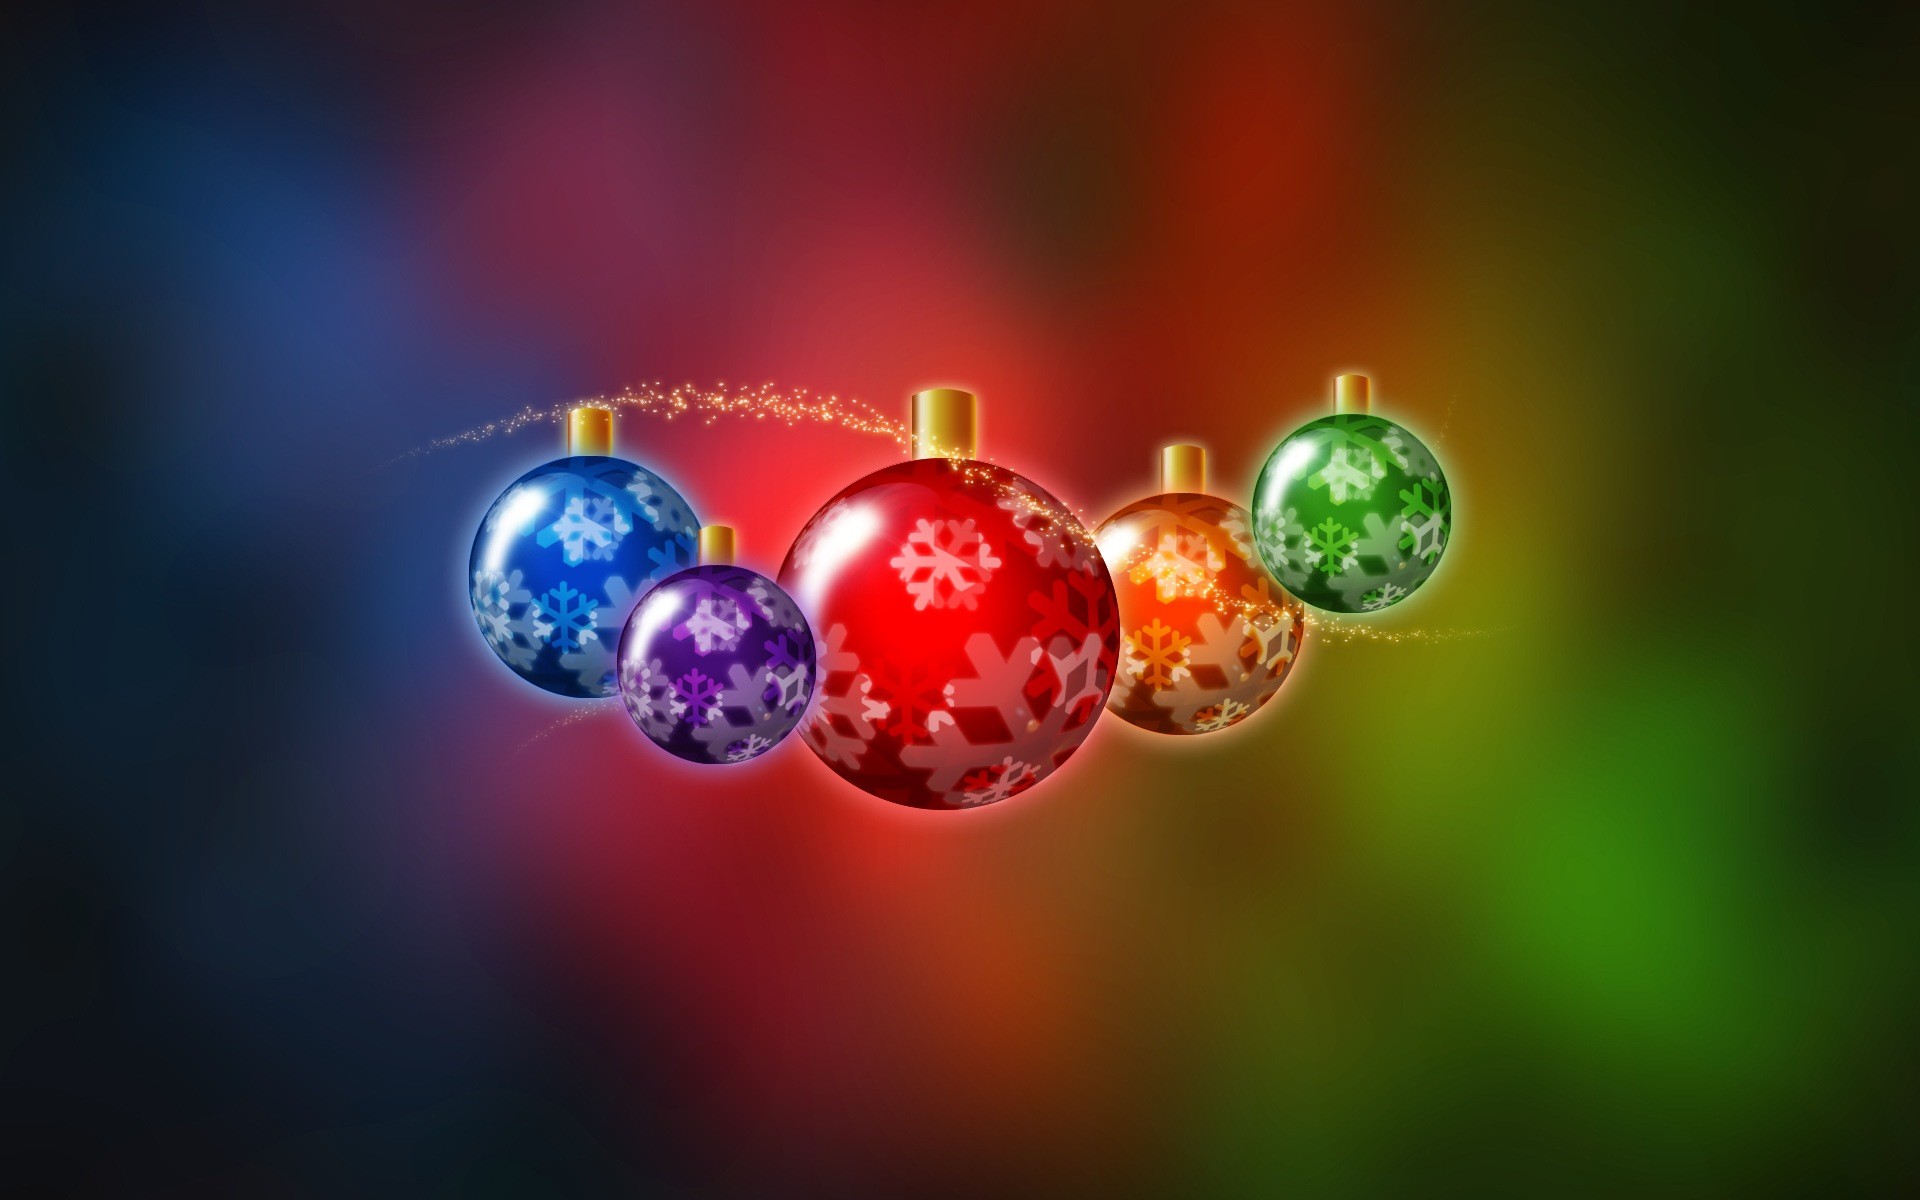 1920x1200 Christmas Wallpaper Widescreen 10998 Hd Wallpapers in Celebrations .